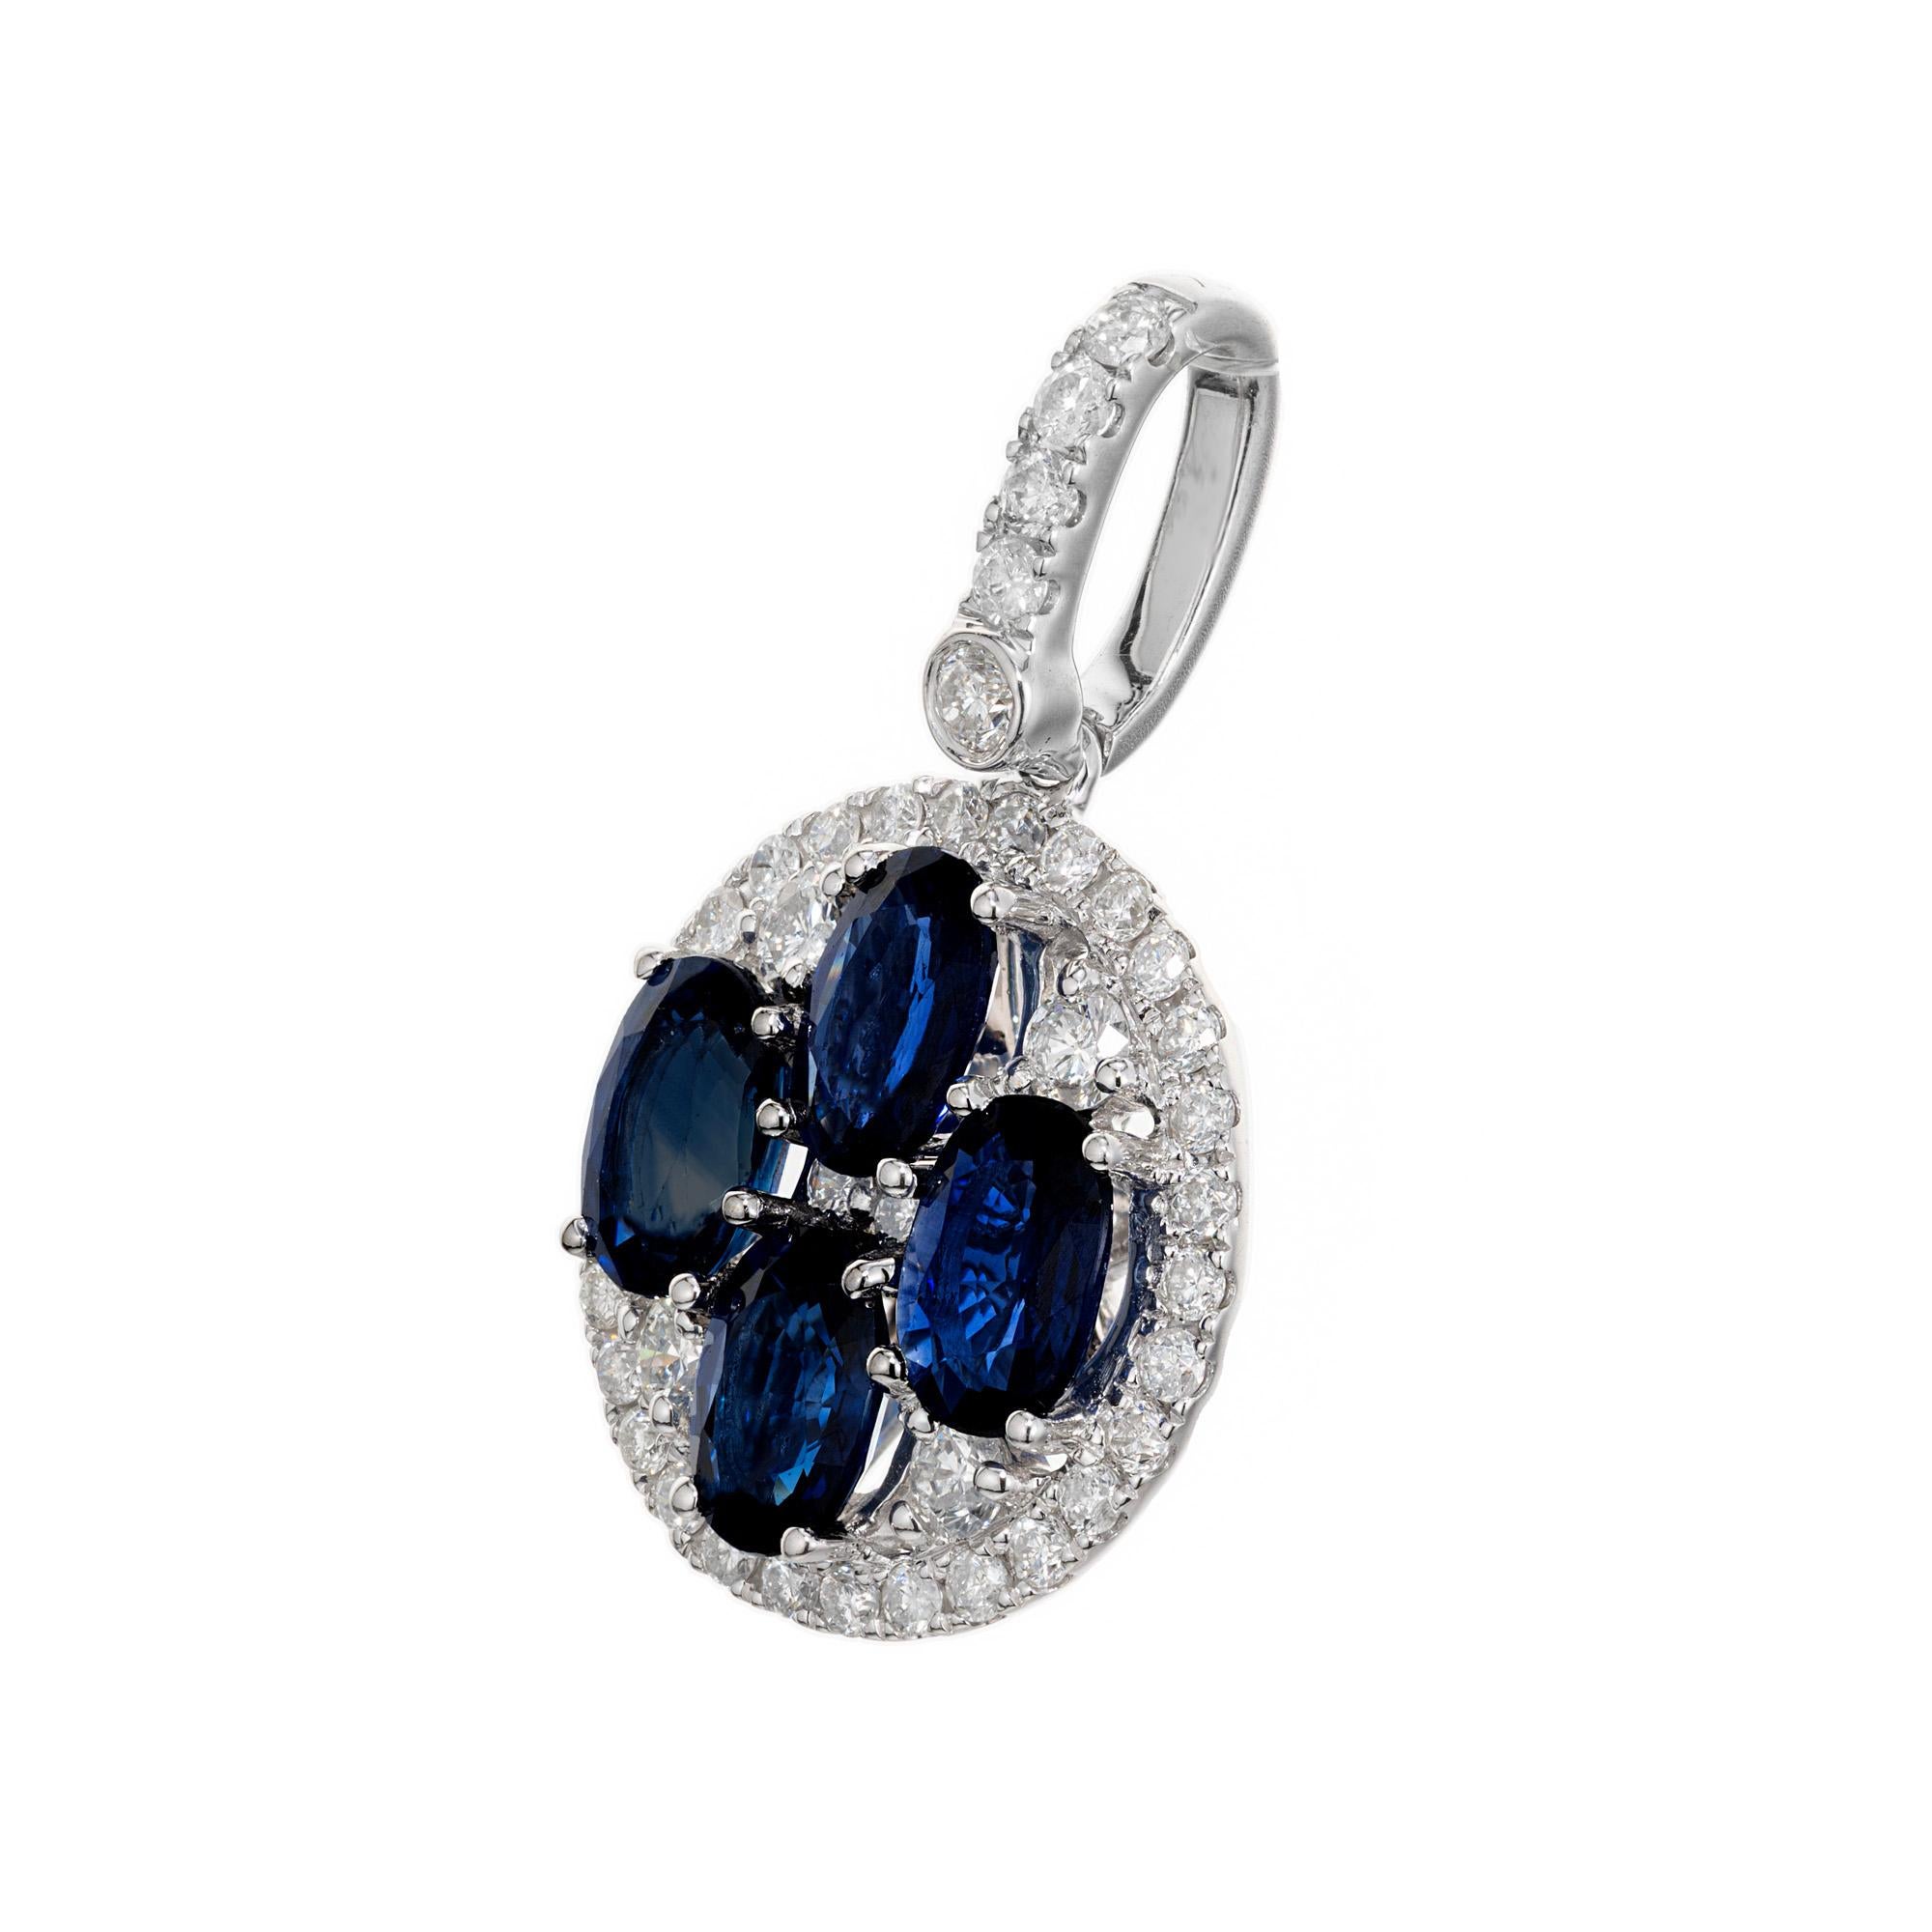 Sapphire and diamond pendant. Four deep blue oval sapphires set in an 18k white gold circle setting. The sapphires are enhanced by a halo of round cut white diamonds. The bezel is also accented with round cu diamonds. The GIA randomly tested one